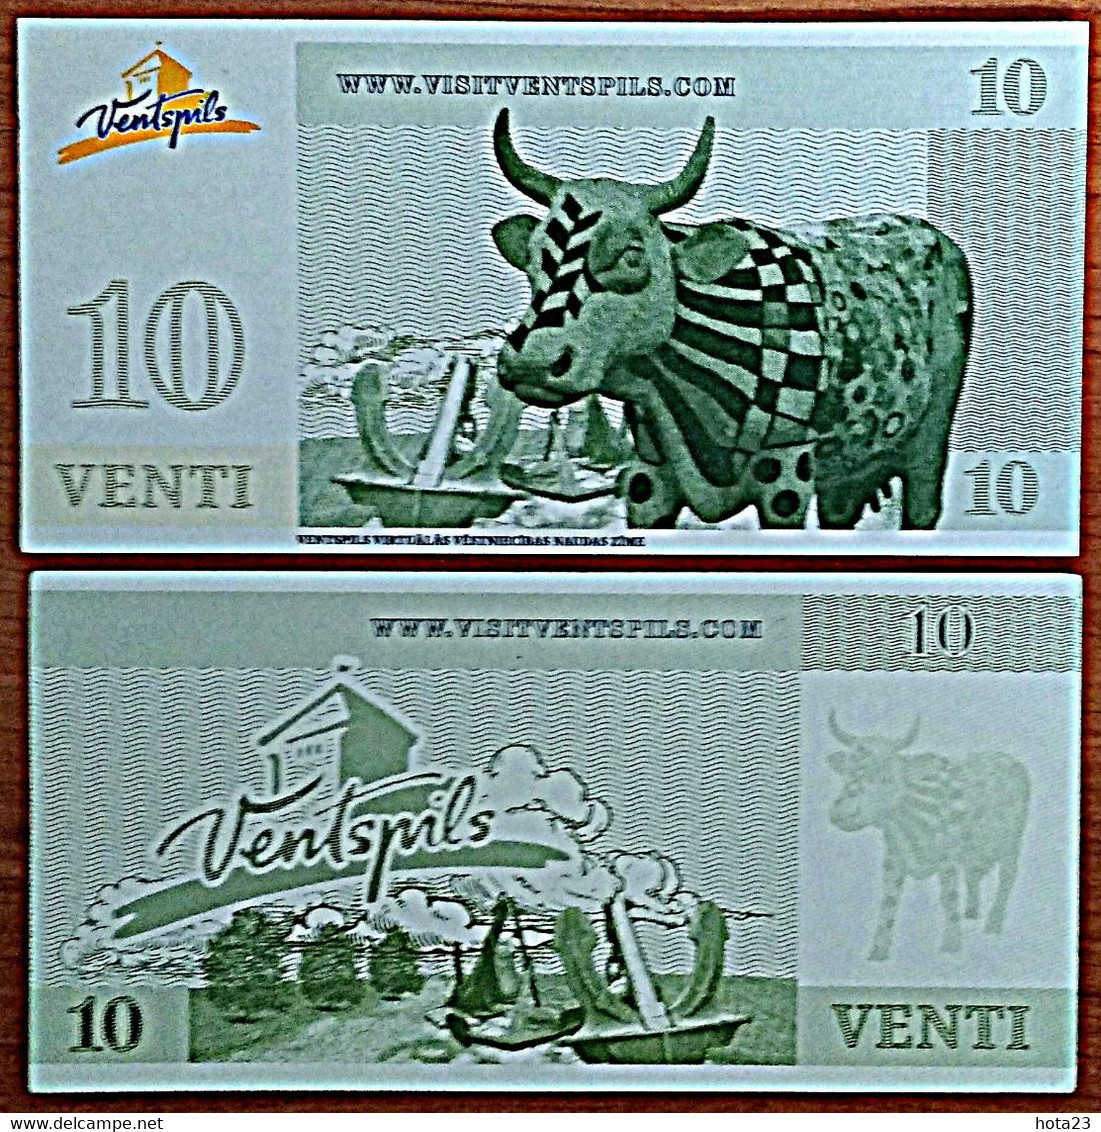 (!) 2011 10 VENTI LATVIA , Lettland , Lettonia  Local Currency Venspils City,cow , Anchor  Unc Banknote - Die Ku , Vaca, - Latvia